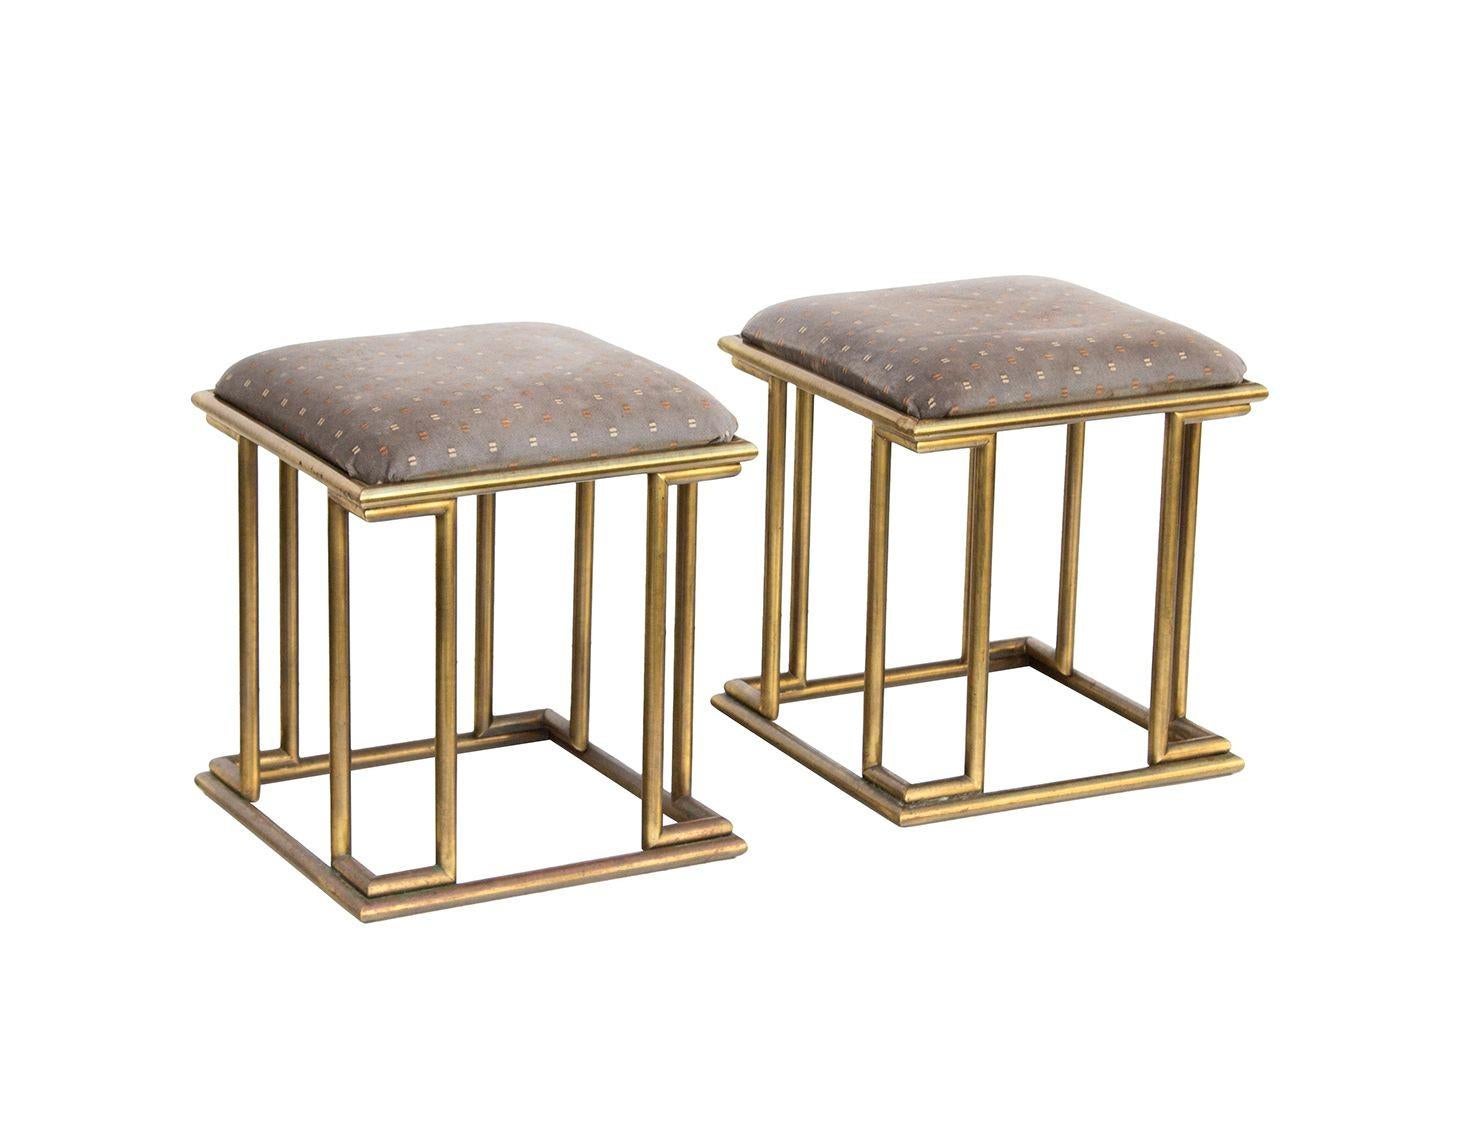 USA, 1970s
Pair of square faux bamboo ottomans in aged brass. Nice detail to this pair, and a great way to add additional seating and flair. Ready for your custom reupholstery.
CONDITION NOTES: Reupholstery recommended as current fabric is ugly and